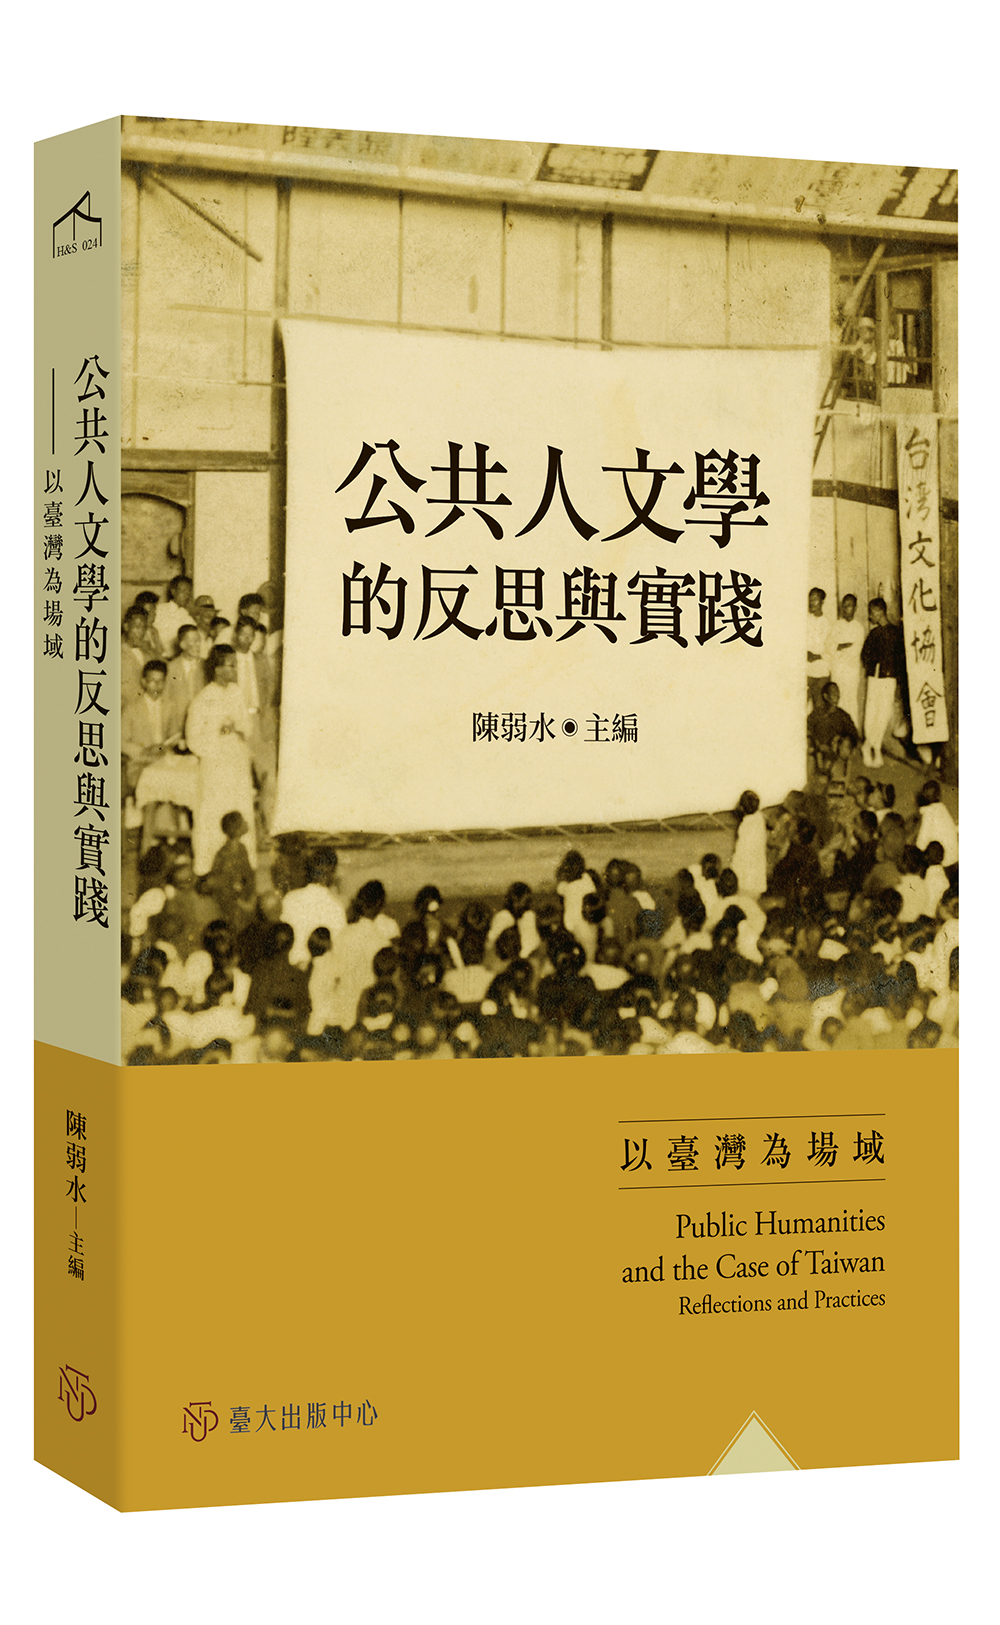 Public Humanities and the Case of Taiwan : Reflections and Practices